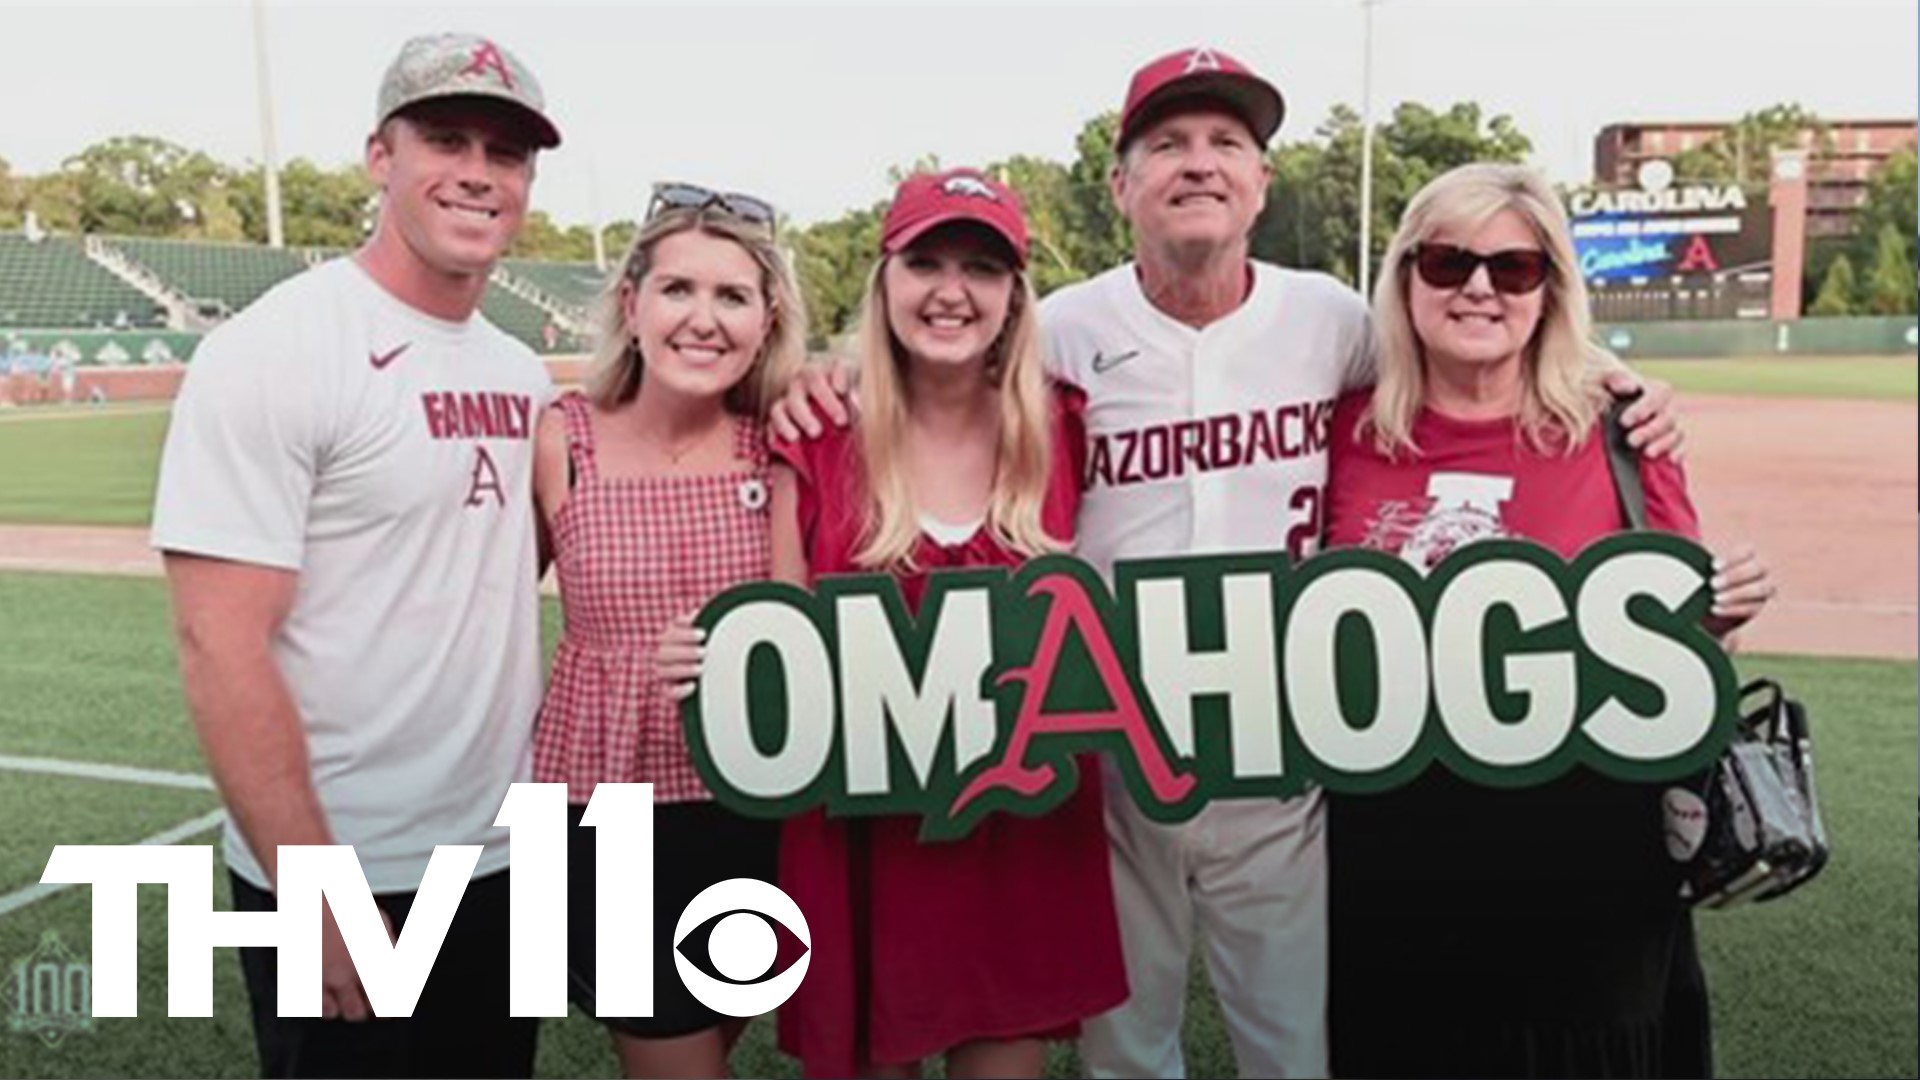 Most people know Dave Van Horn as head coach of the Razorbacks baseball team. But his two daughters, know a different side to the Head Hog